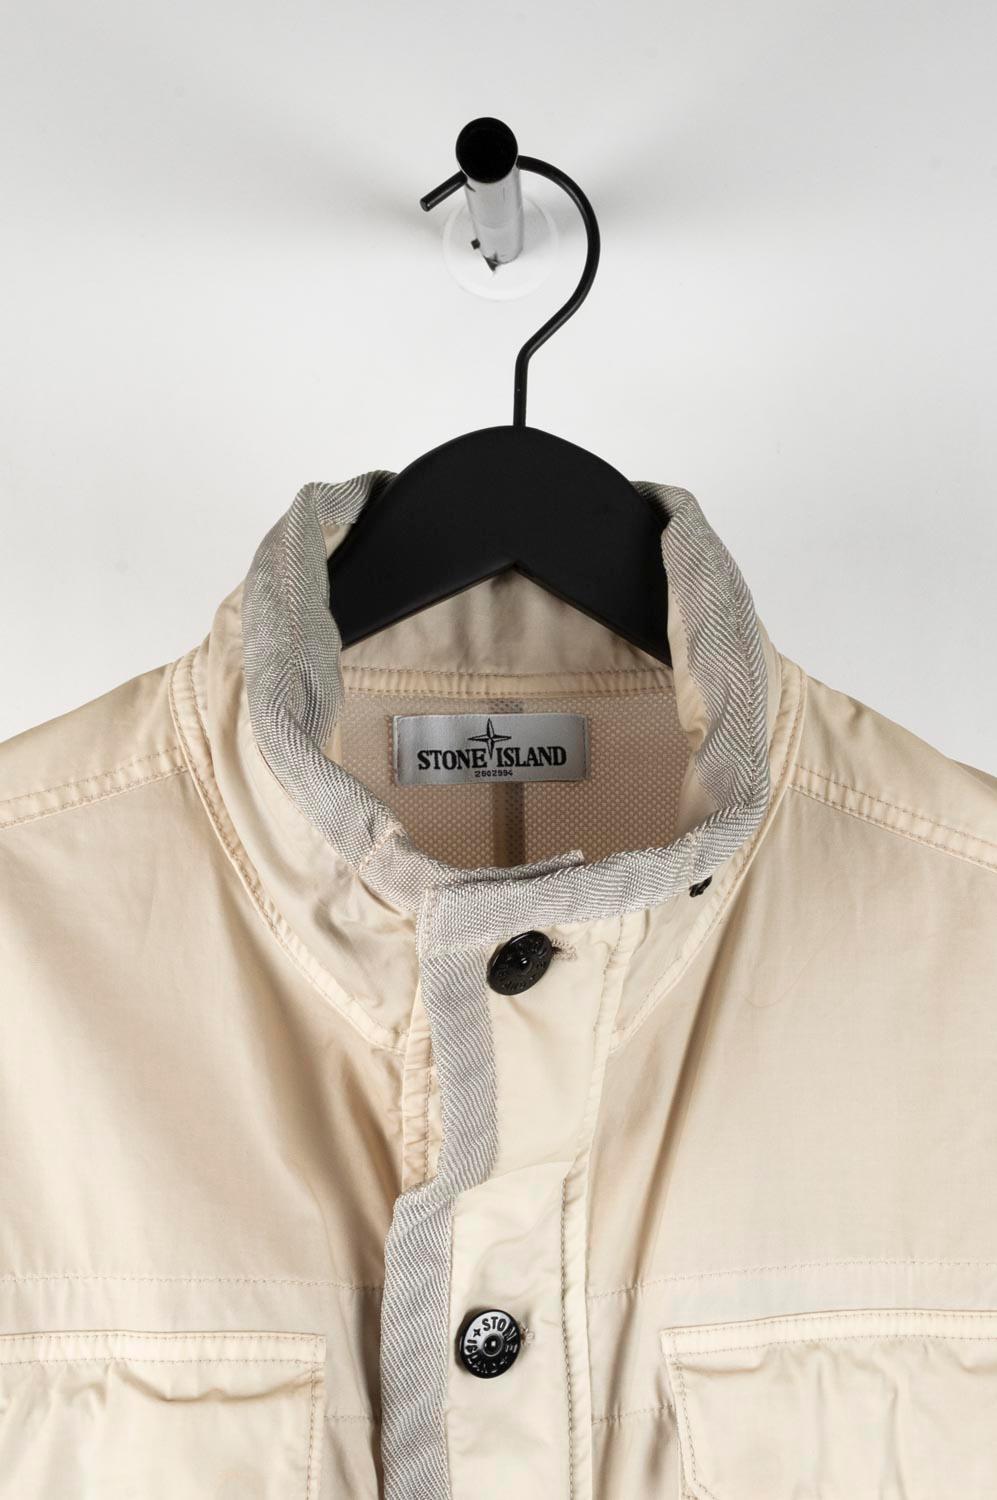 Item for sale is 100% genuine Stone Island Mussola Gommata Light Hidden Hoodie Men Jacket, Size L S430
Color: cream
(An actual color may a bit vary due to individual computer screen interpretation)
Material: 100% cotton
Tag size: L 
This jacket is